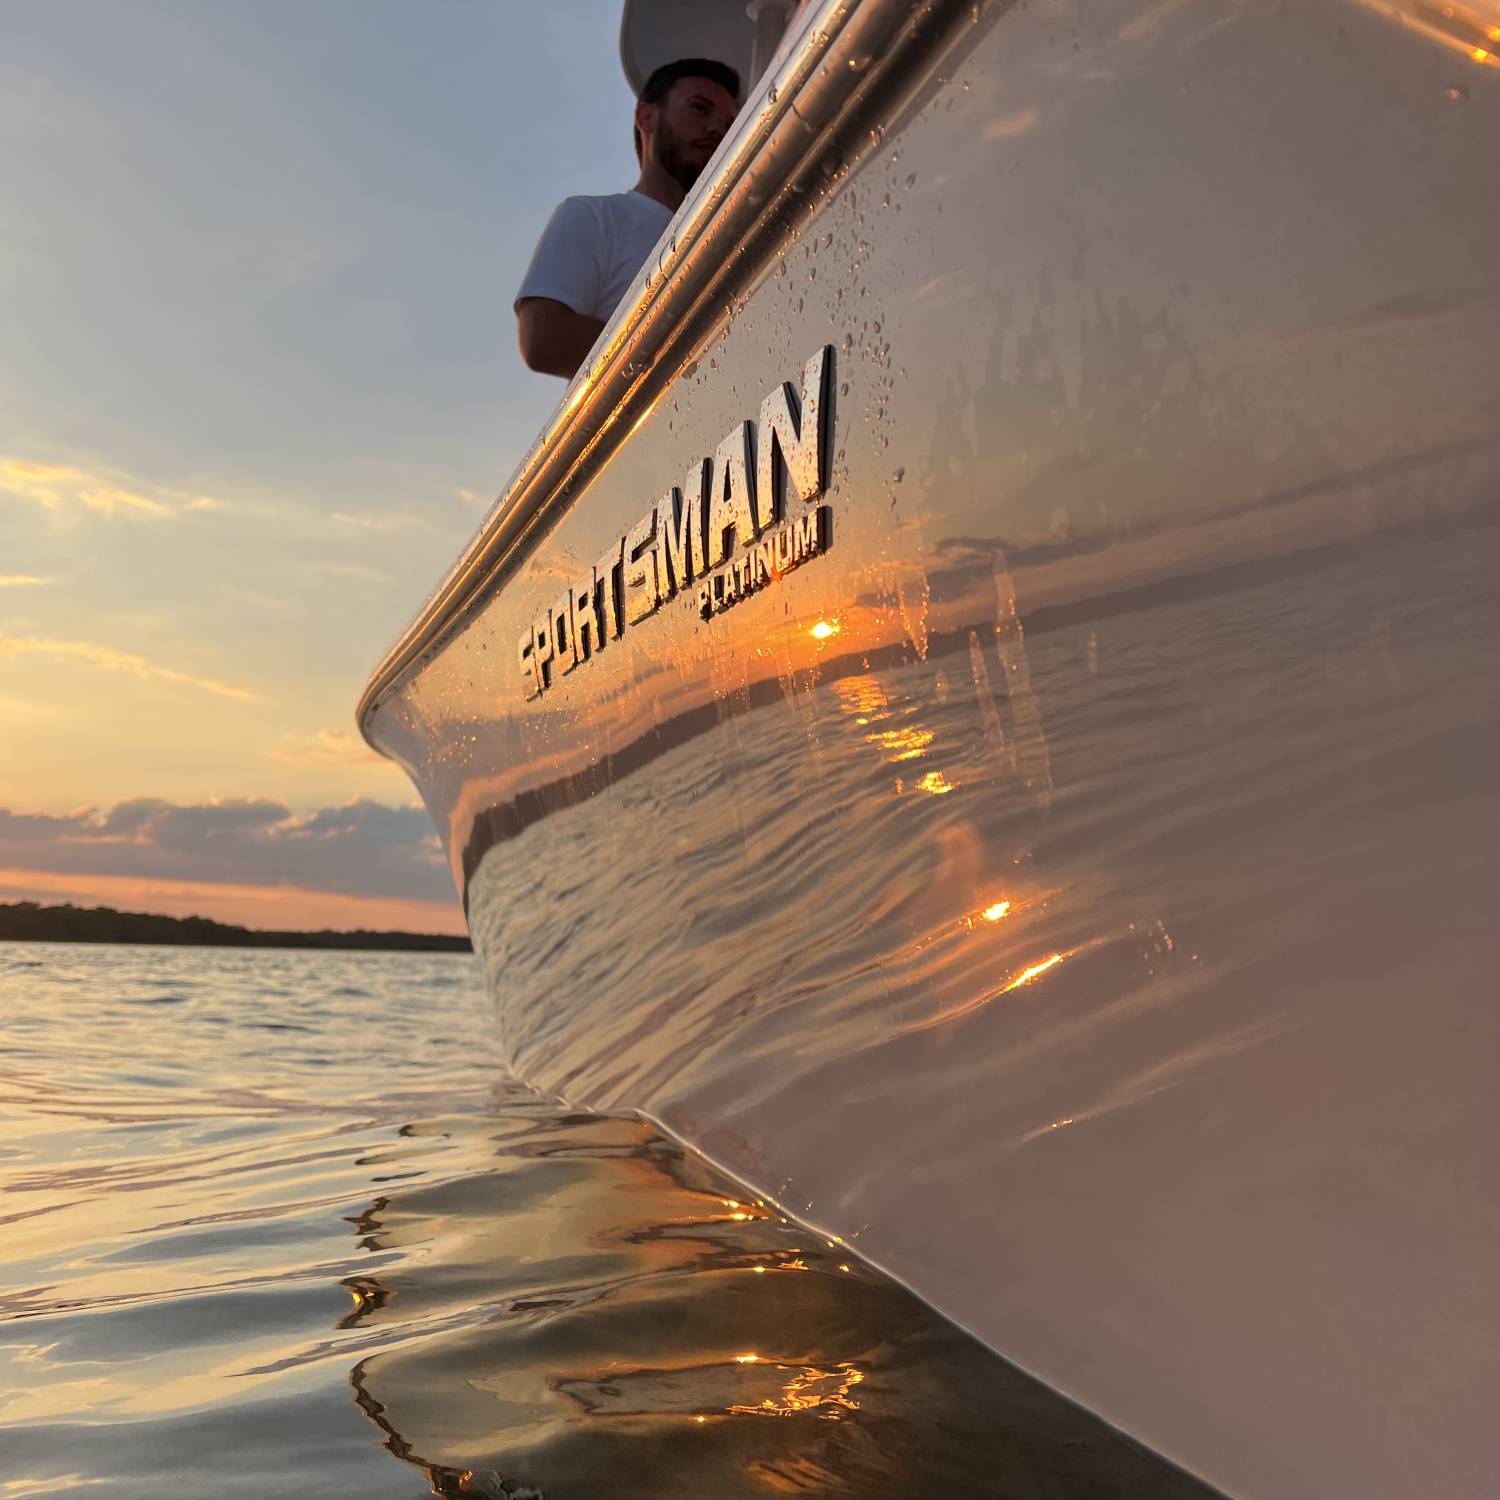 Title: Charleston sunset - On board their Sportsman Open 212 Center Console - Location: Stono River in Charleston sc. Participating in the Photo Contest #SportsmanJune